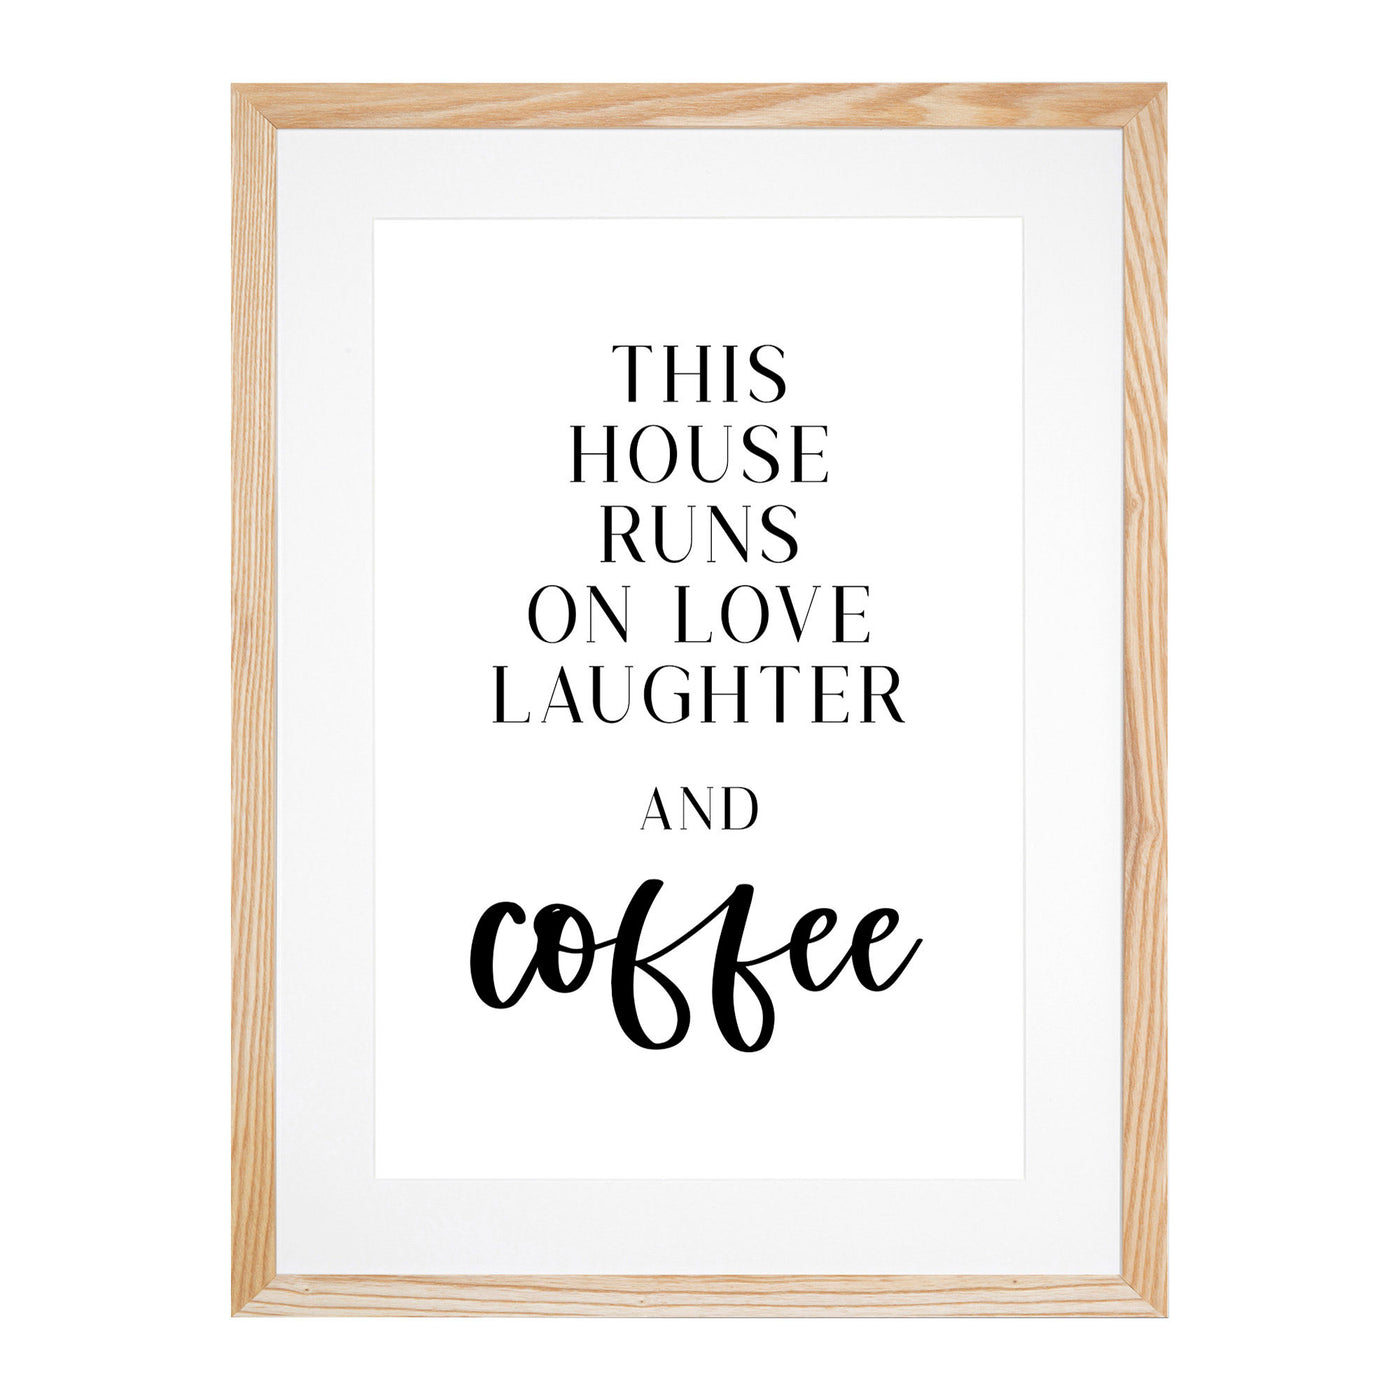 Love Laughter and Coffee